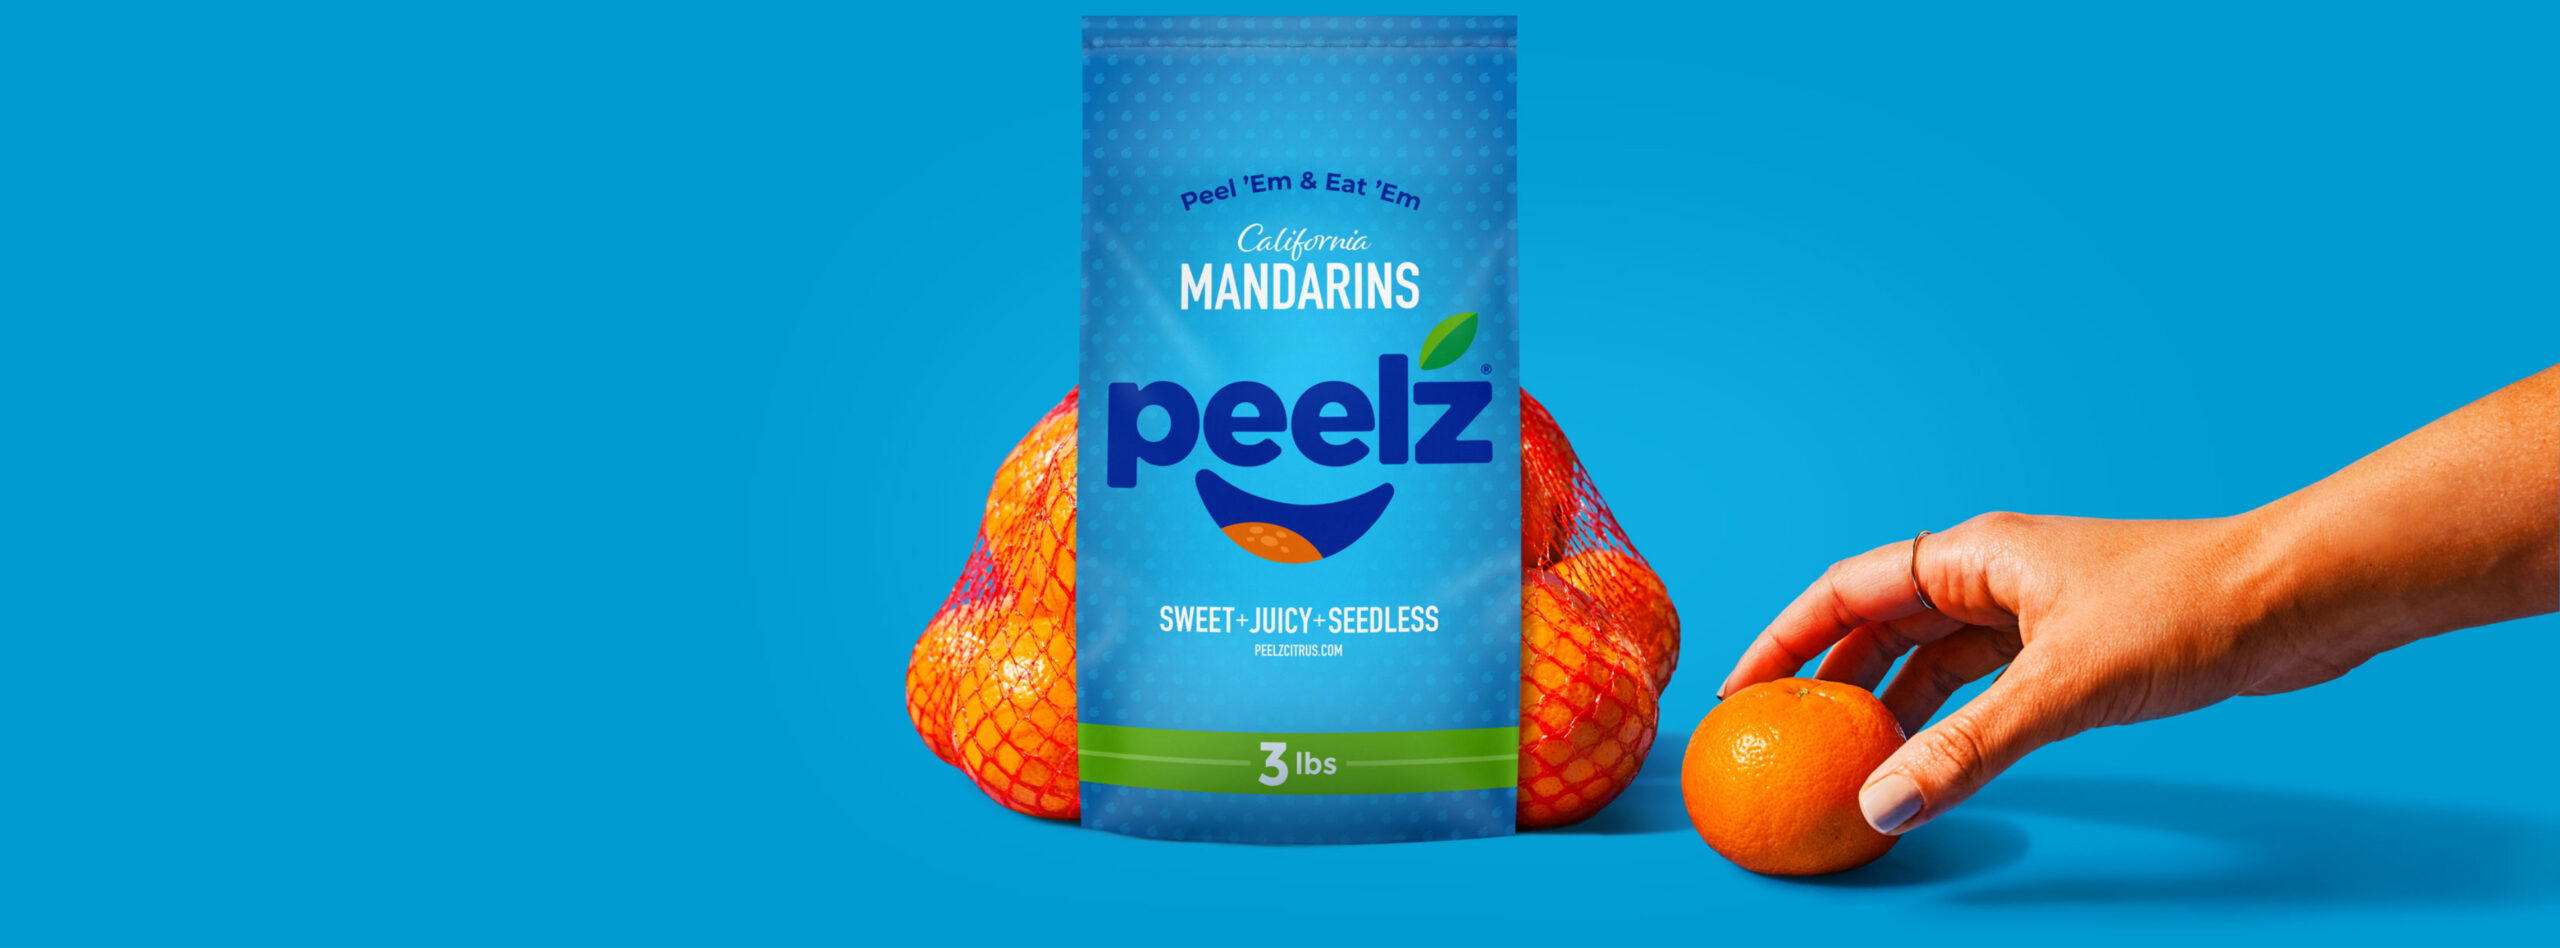 Peelz mandarins packed with a hand reaching for a mandarin sitting in front of the bag